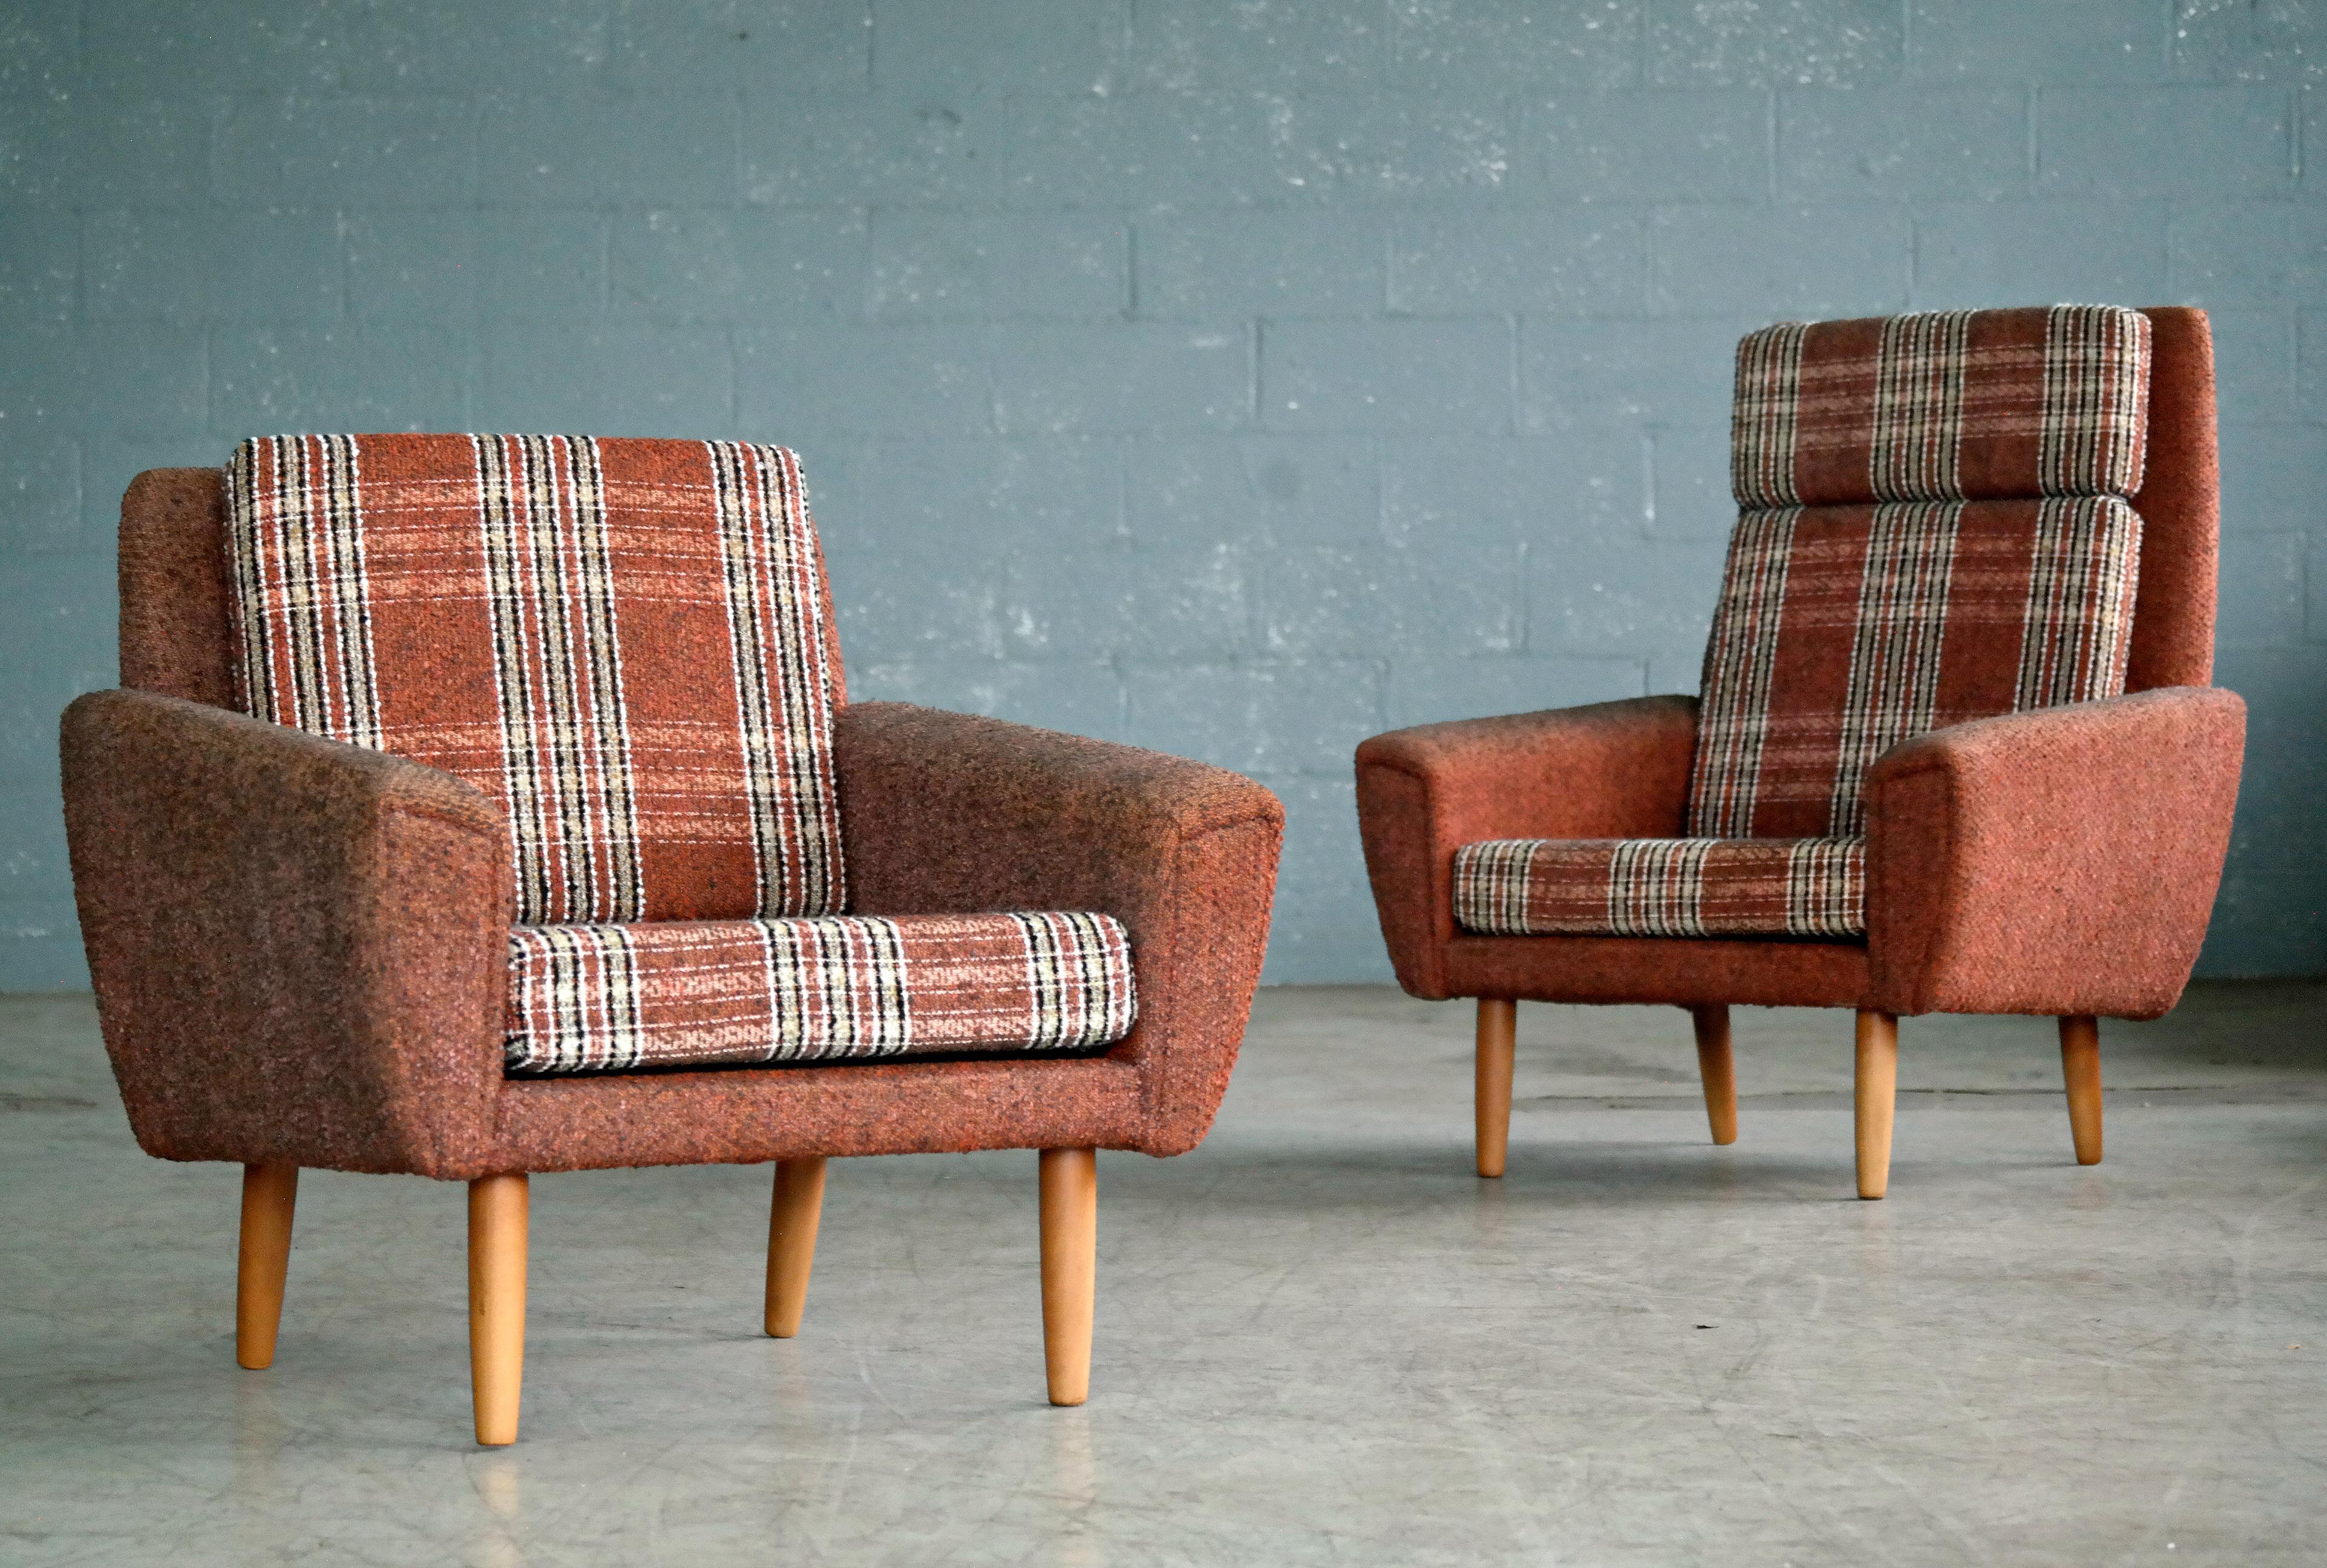 Great set of 1960s pair if easy chairs possibly designed by Kurt Østervig for Ryesberg Mobler. Very Classic 1960s design. These chairs bear strong resemblance to Ostervig's characteristic design with tear drop front panels continuing to the backside